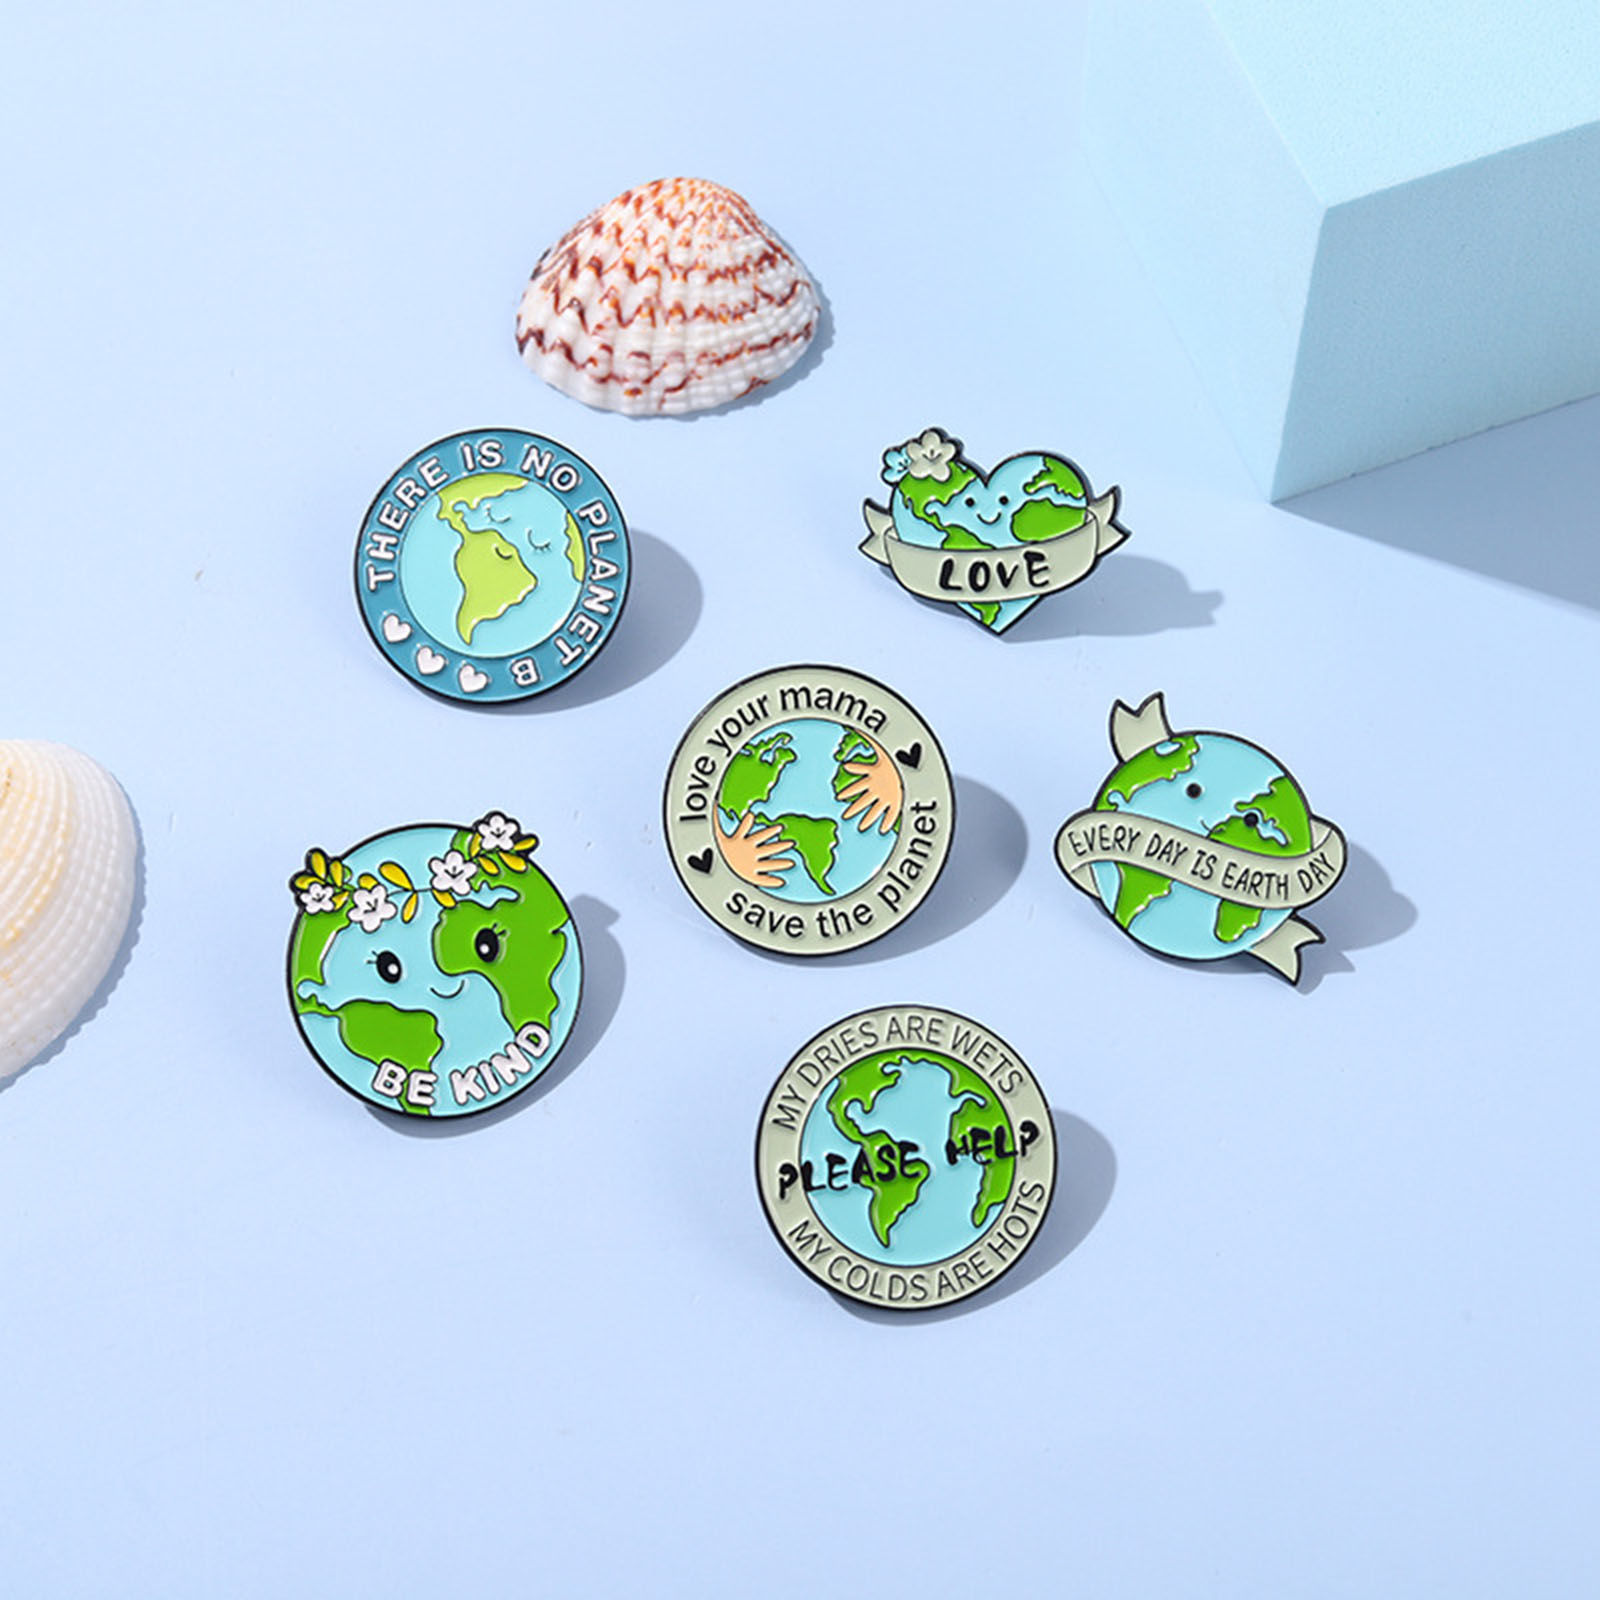 Picture of Zinc Based Alloy Pin Brooches Planet Earth Multicolor Enamel 1 Piece